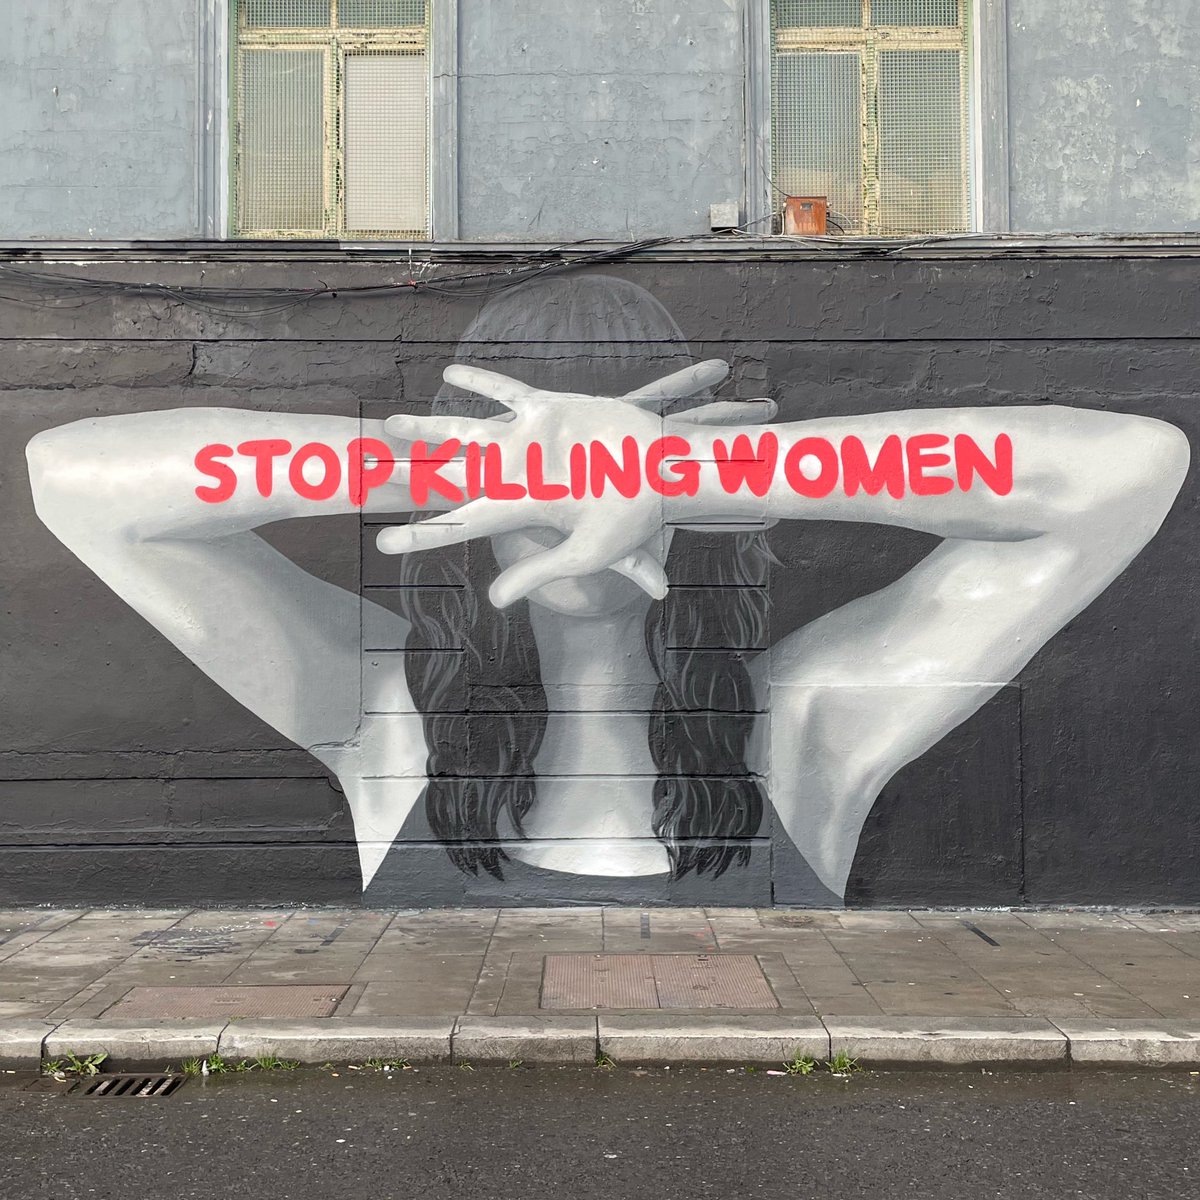 'Never again' is a promise to women that society cannot keep. On the first anniversary of the death of Ashling Murphy, we remember her and the 11 women who have died in violent circumstances since - Sandra, Mary, Ruth, Lisa, Louise, Larisa, Miriam, Lisa, Ioana, Sharon & Bruna